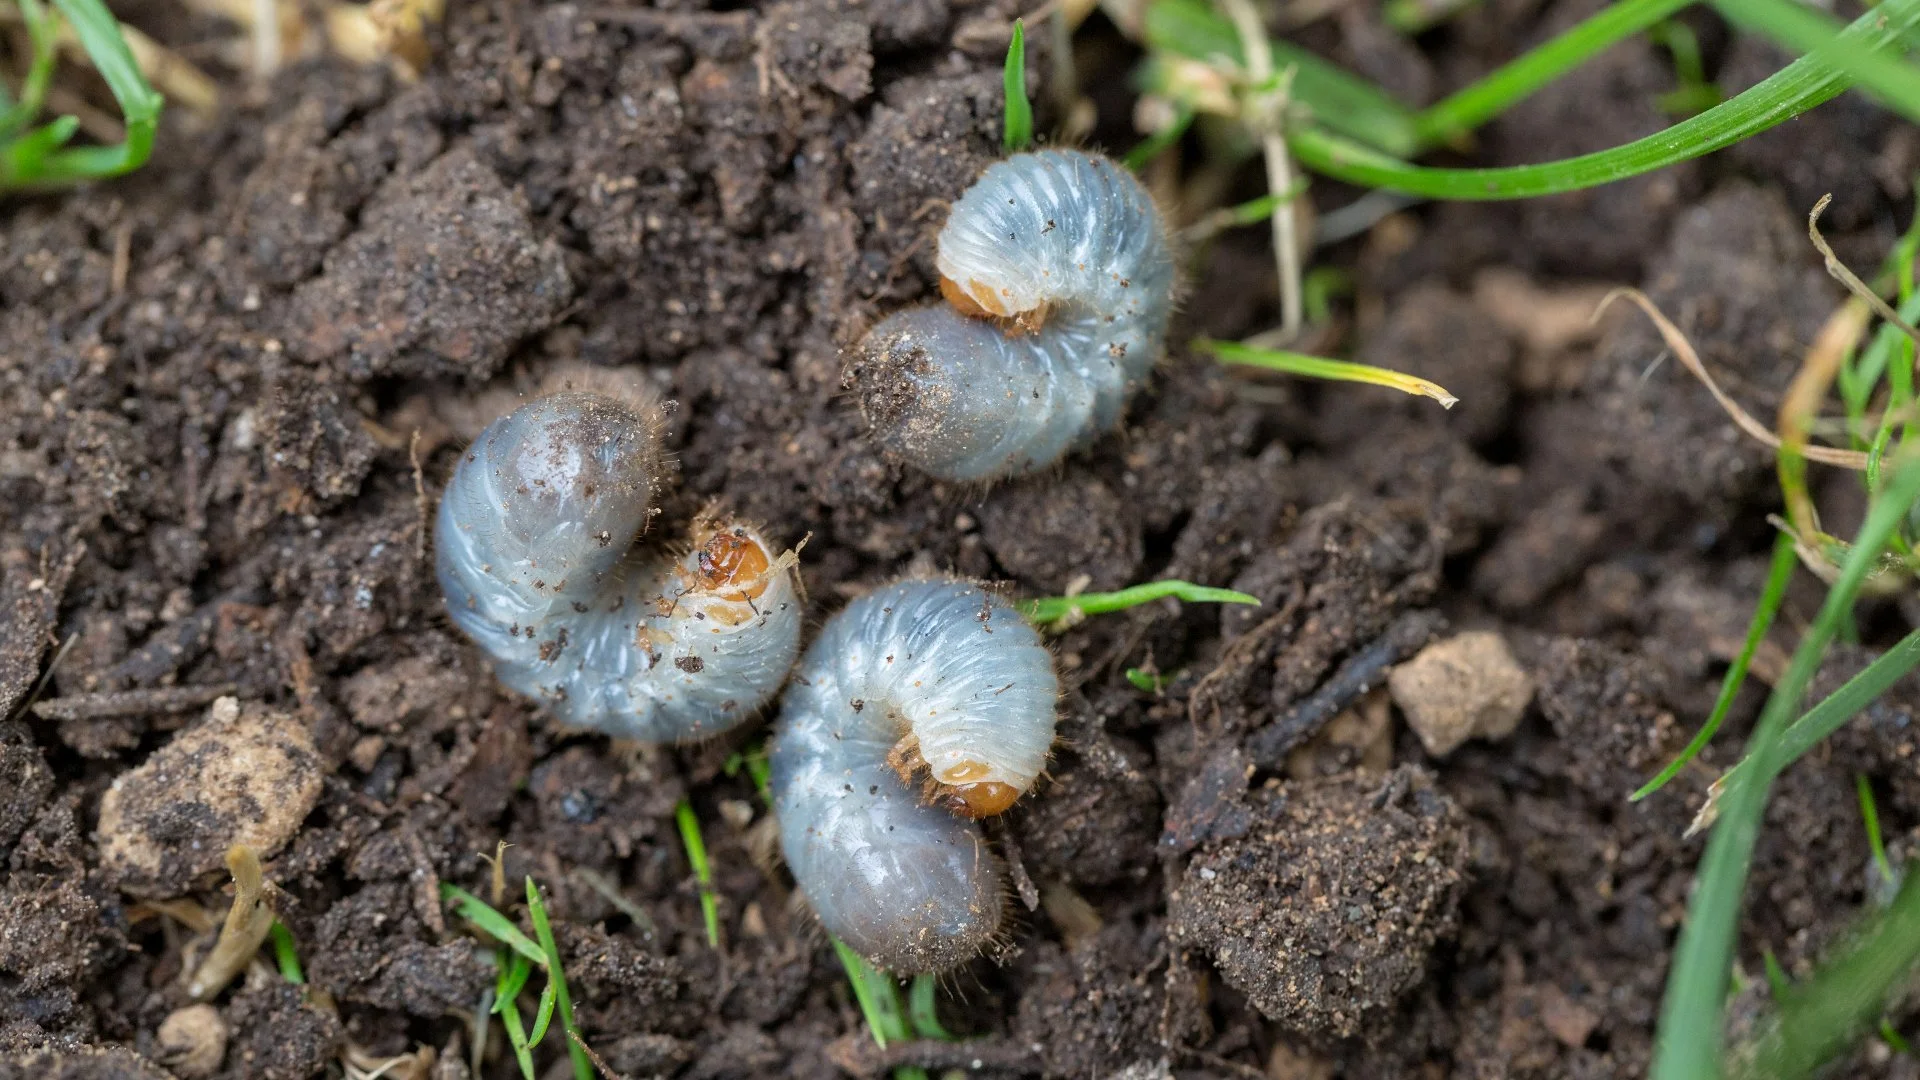 What Is the Best Way to Get Rid of Grubs in My Lawn?